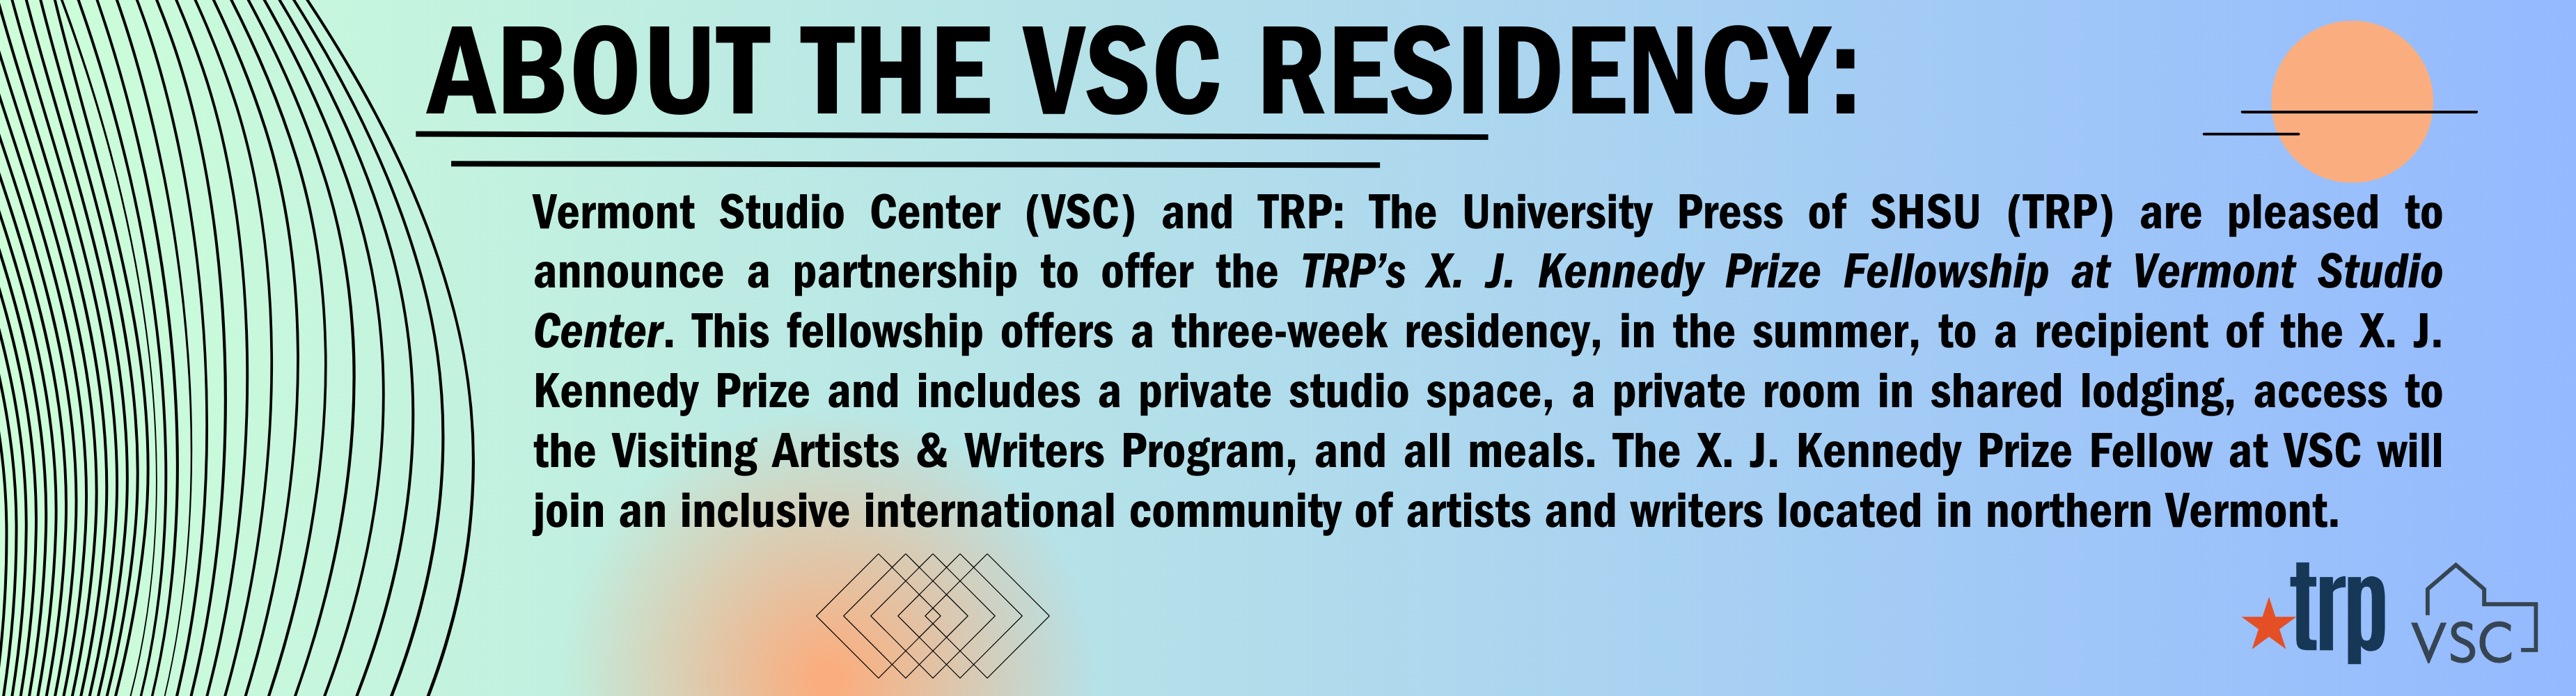 About the VSC Residency: Vermont Studio Center (VSC) and TRP: The University Press of SHSU (TRP) are pleased to announce a partnership to offer the TRP’s X. J. Kennedy Prize Fellowship at Vermont Studio Center. This fellowship offers a three-week residency, in the summer, to a recipient of the X. J. Kennedy Prize and includes a private studio space, a private room in shared lodging, access to the Visiting Artists & Writers Program, and all meals. The X. J. Kennedy Prize Fellow at VSC will join an inclusive international community of artists and writers located in northern Vermont.